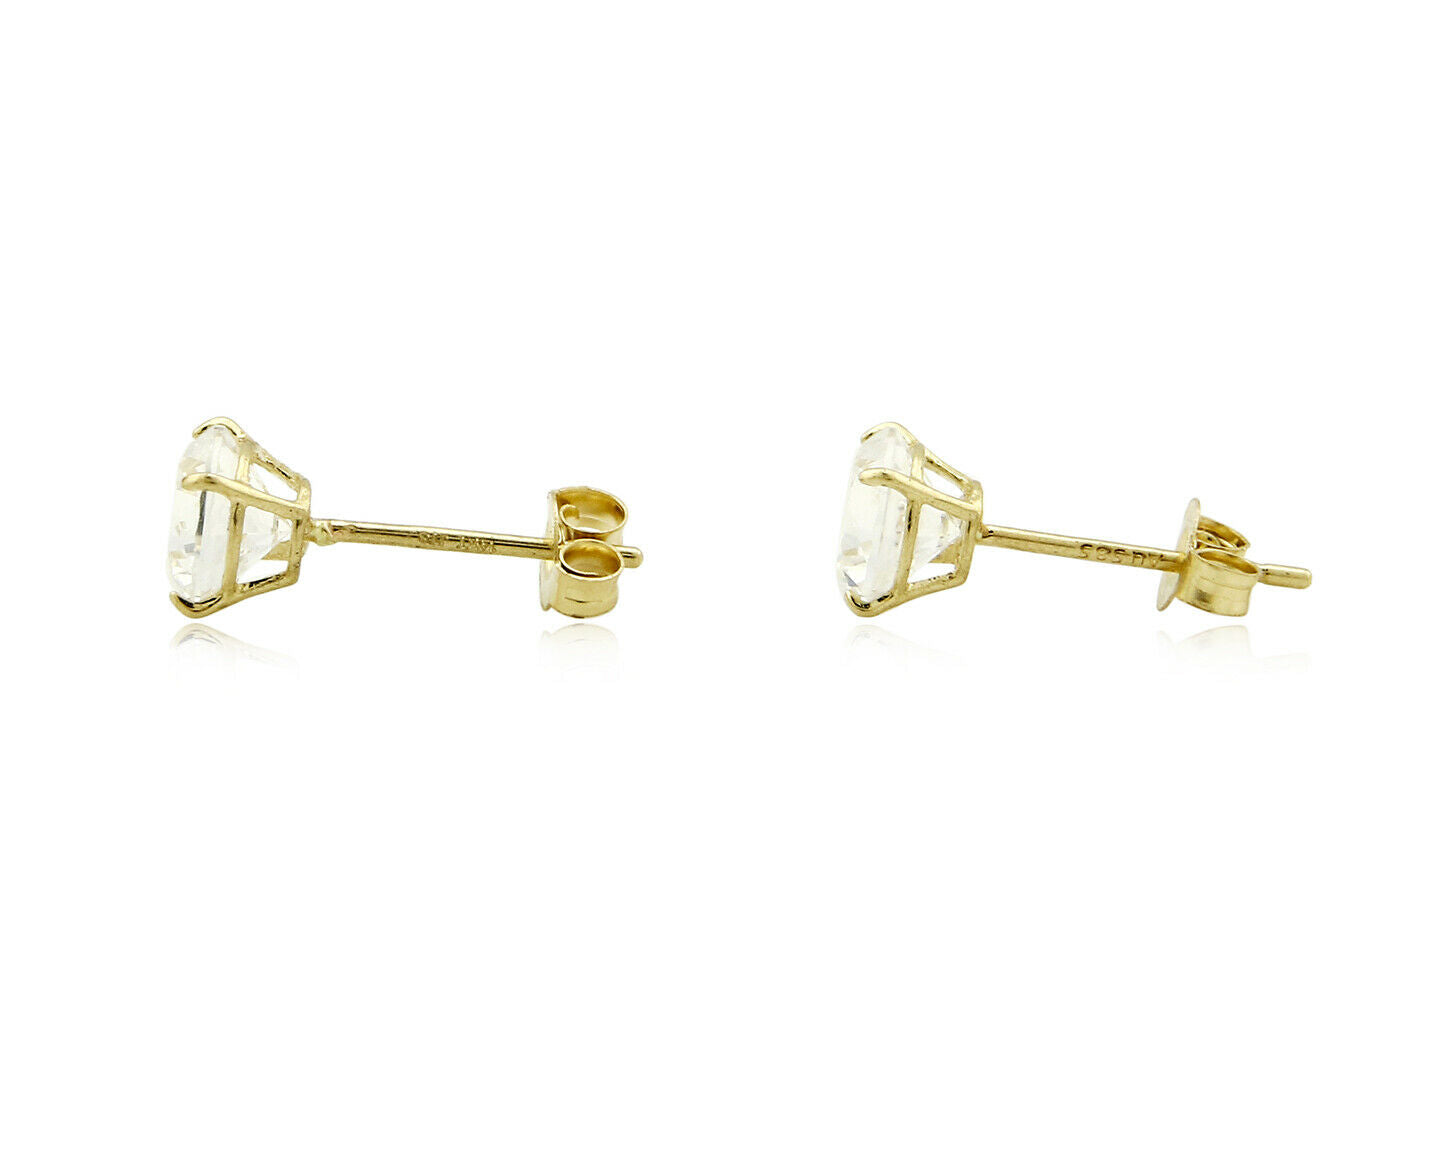 SOLID 14k Yellow Gold 5.0mm Wide Top Grade CZ Pushback Stud Earrings